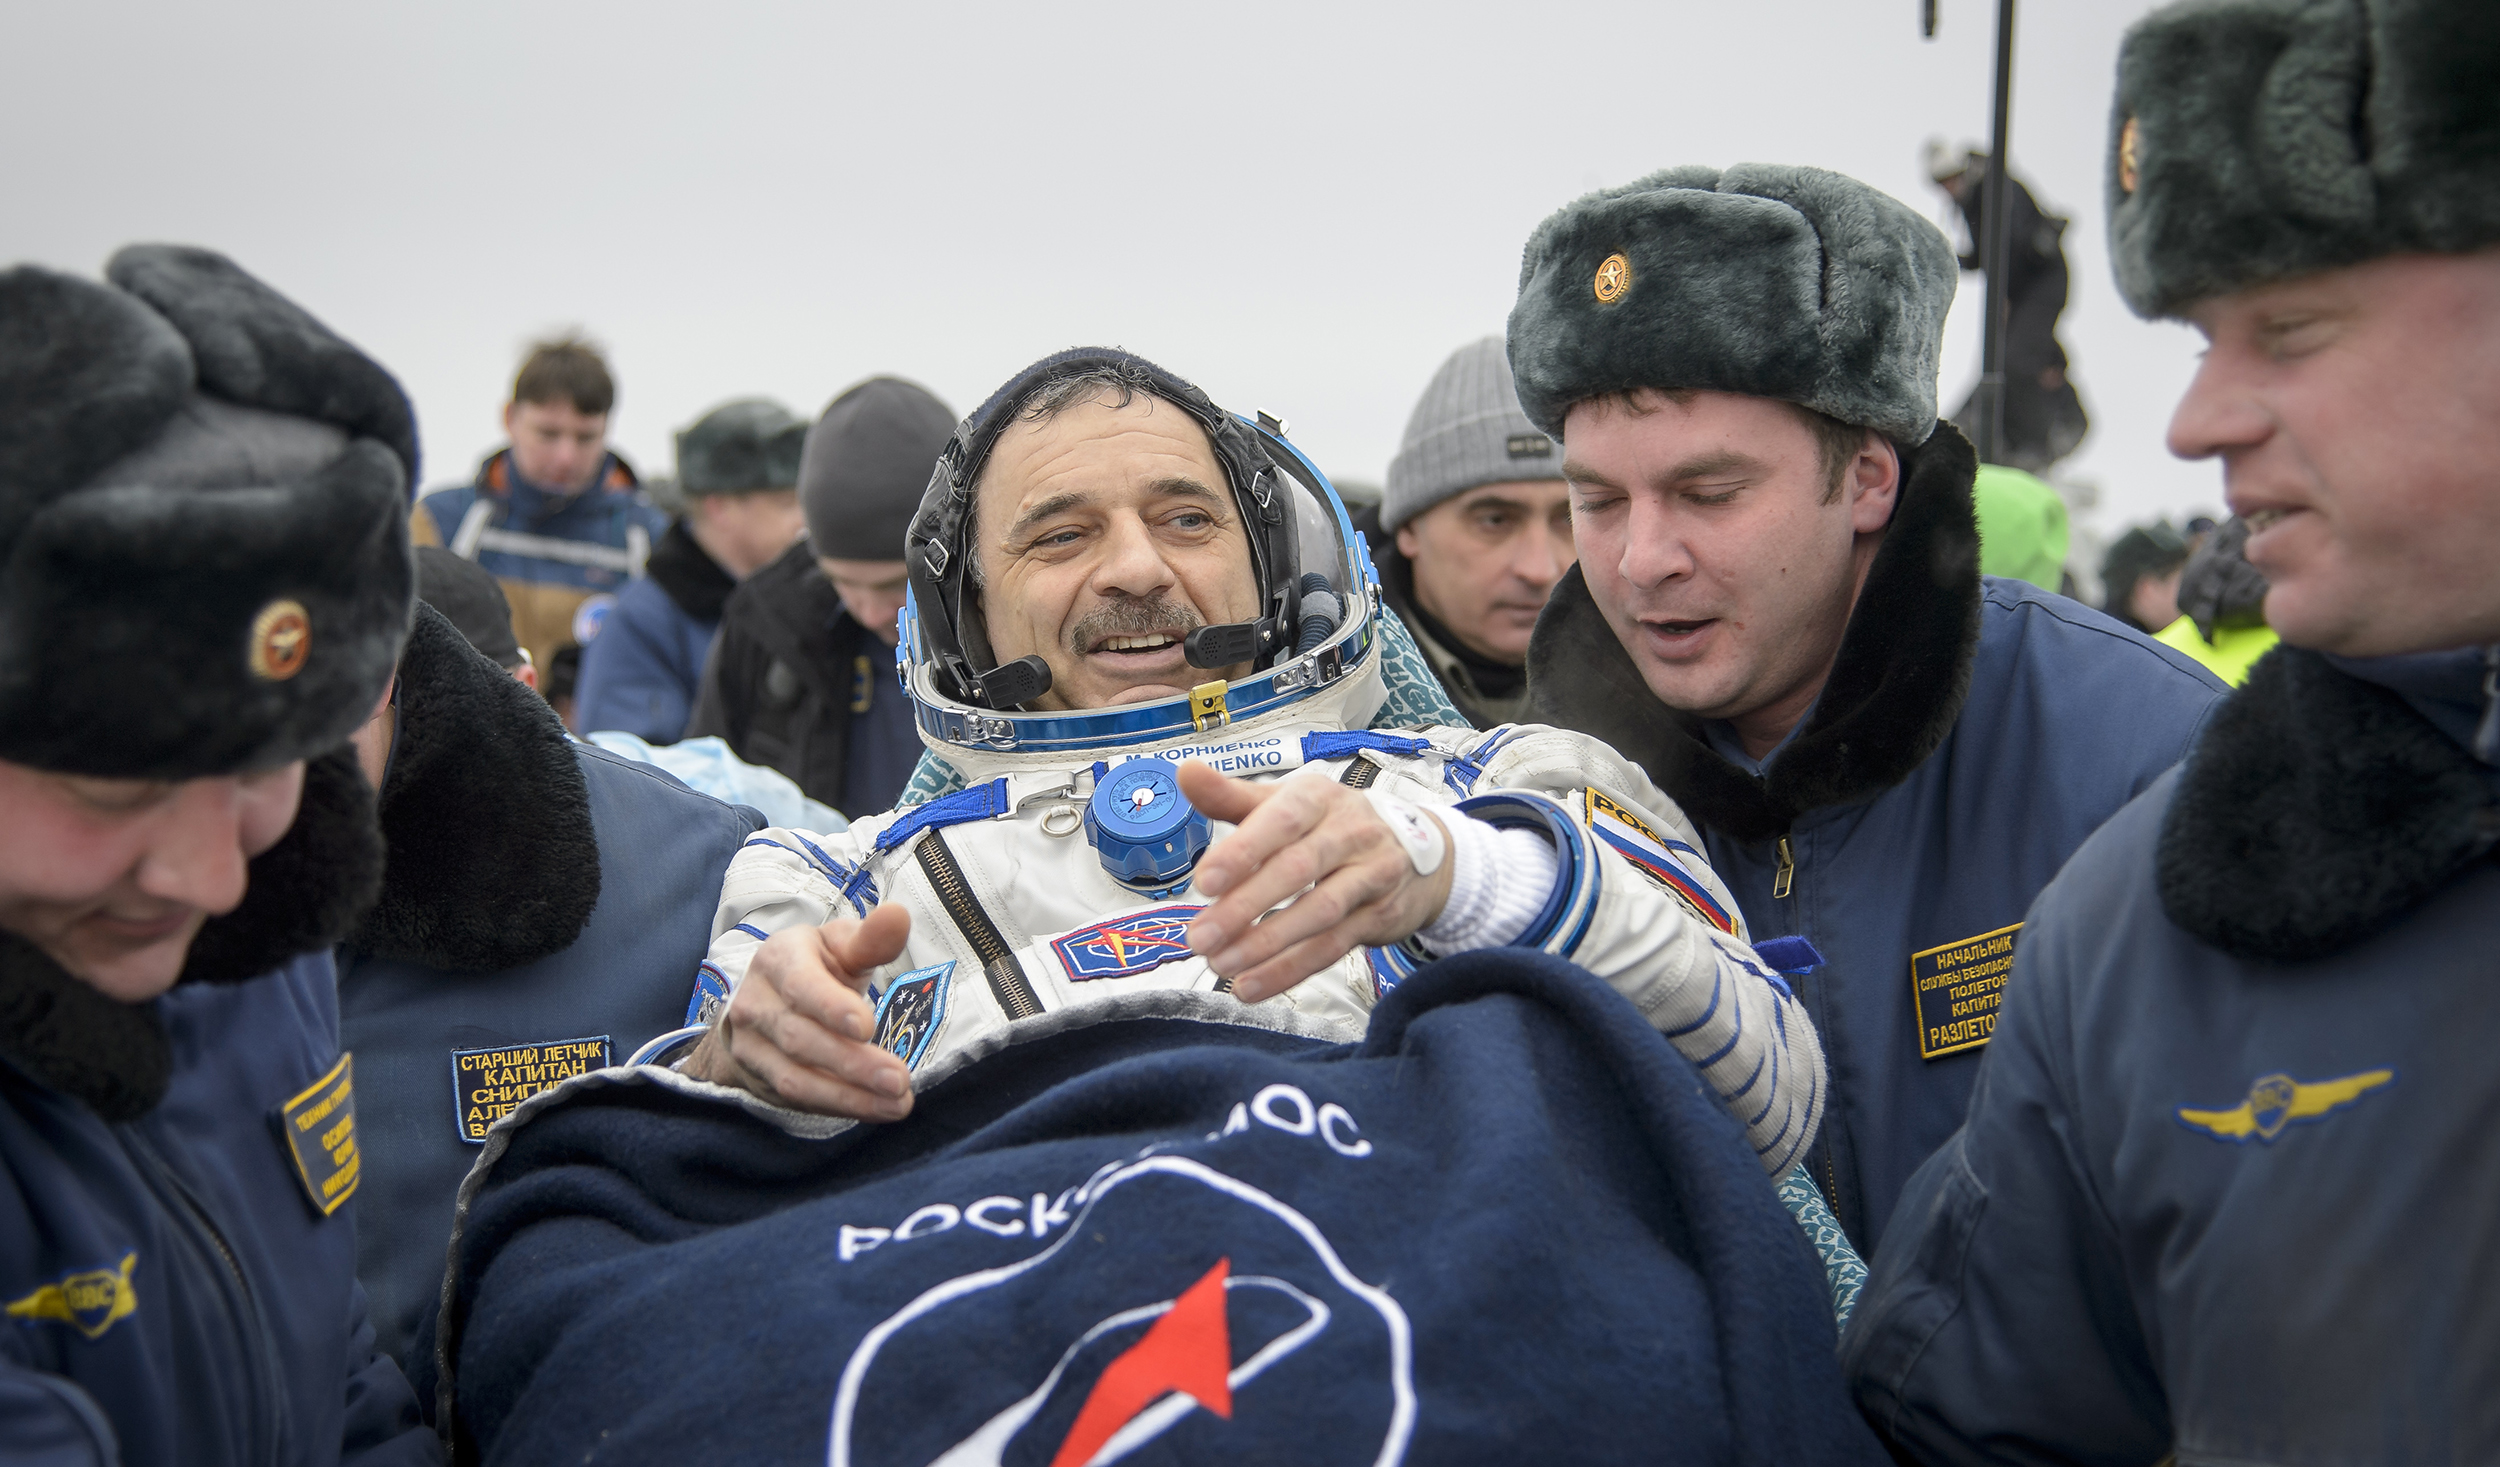 Russian cosmonaut Mikhail Kornienko of Roscosmos is carried into a medical tent after he, Scott Kelly and Sergey Volkov landed in their Soyuz TMA-18M spacecraft in a remote area on March 2, 2016 near the town of Zhezkazgan, Kazakhstan.